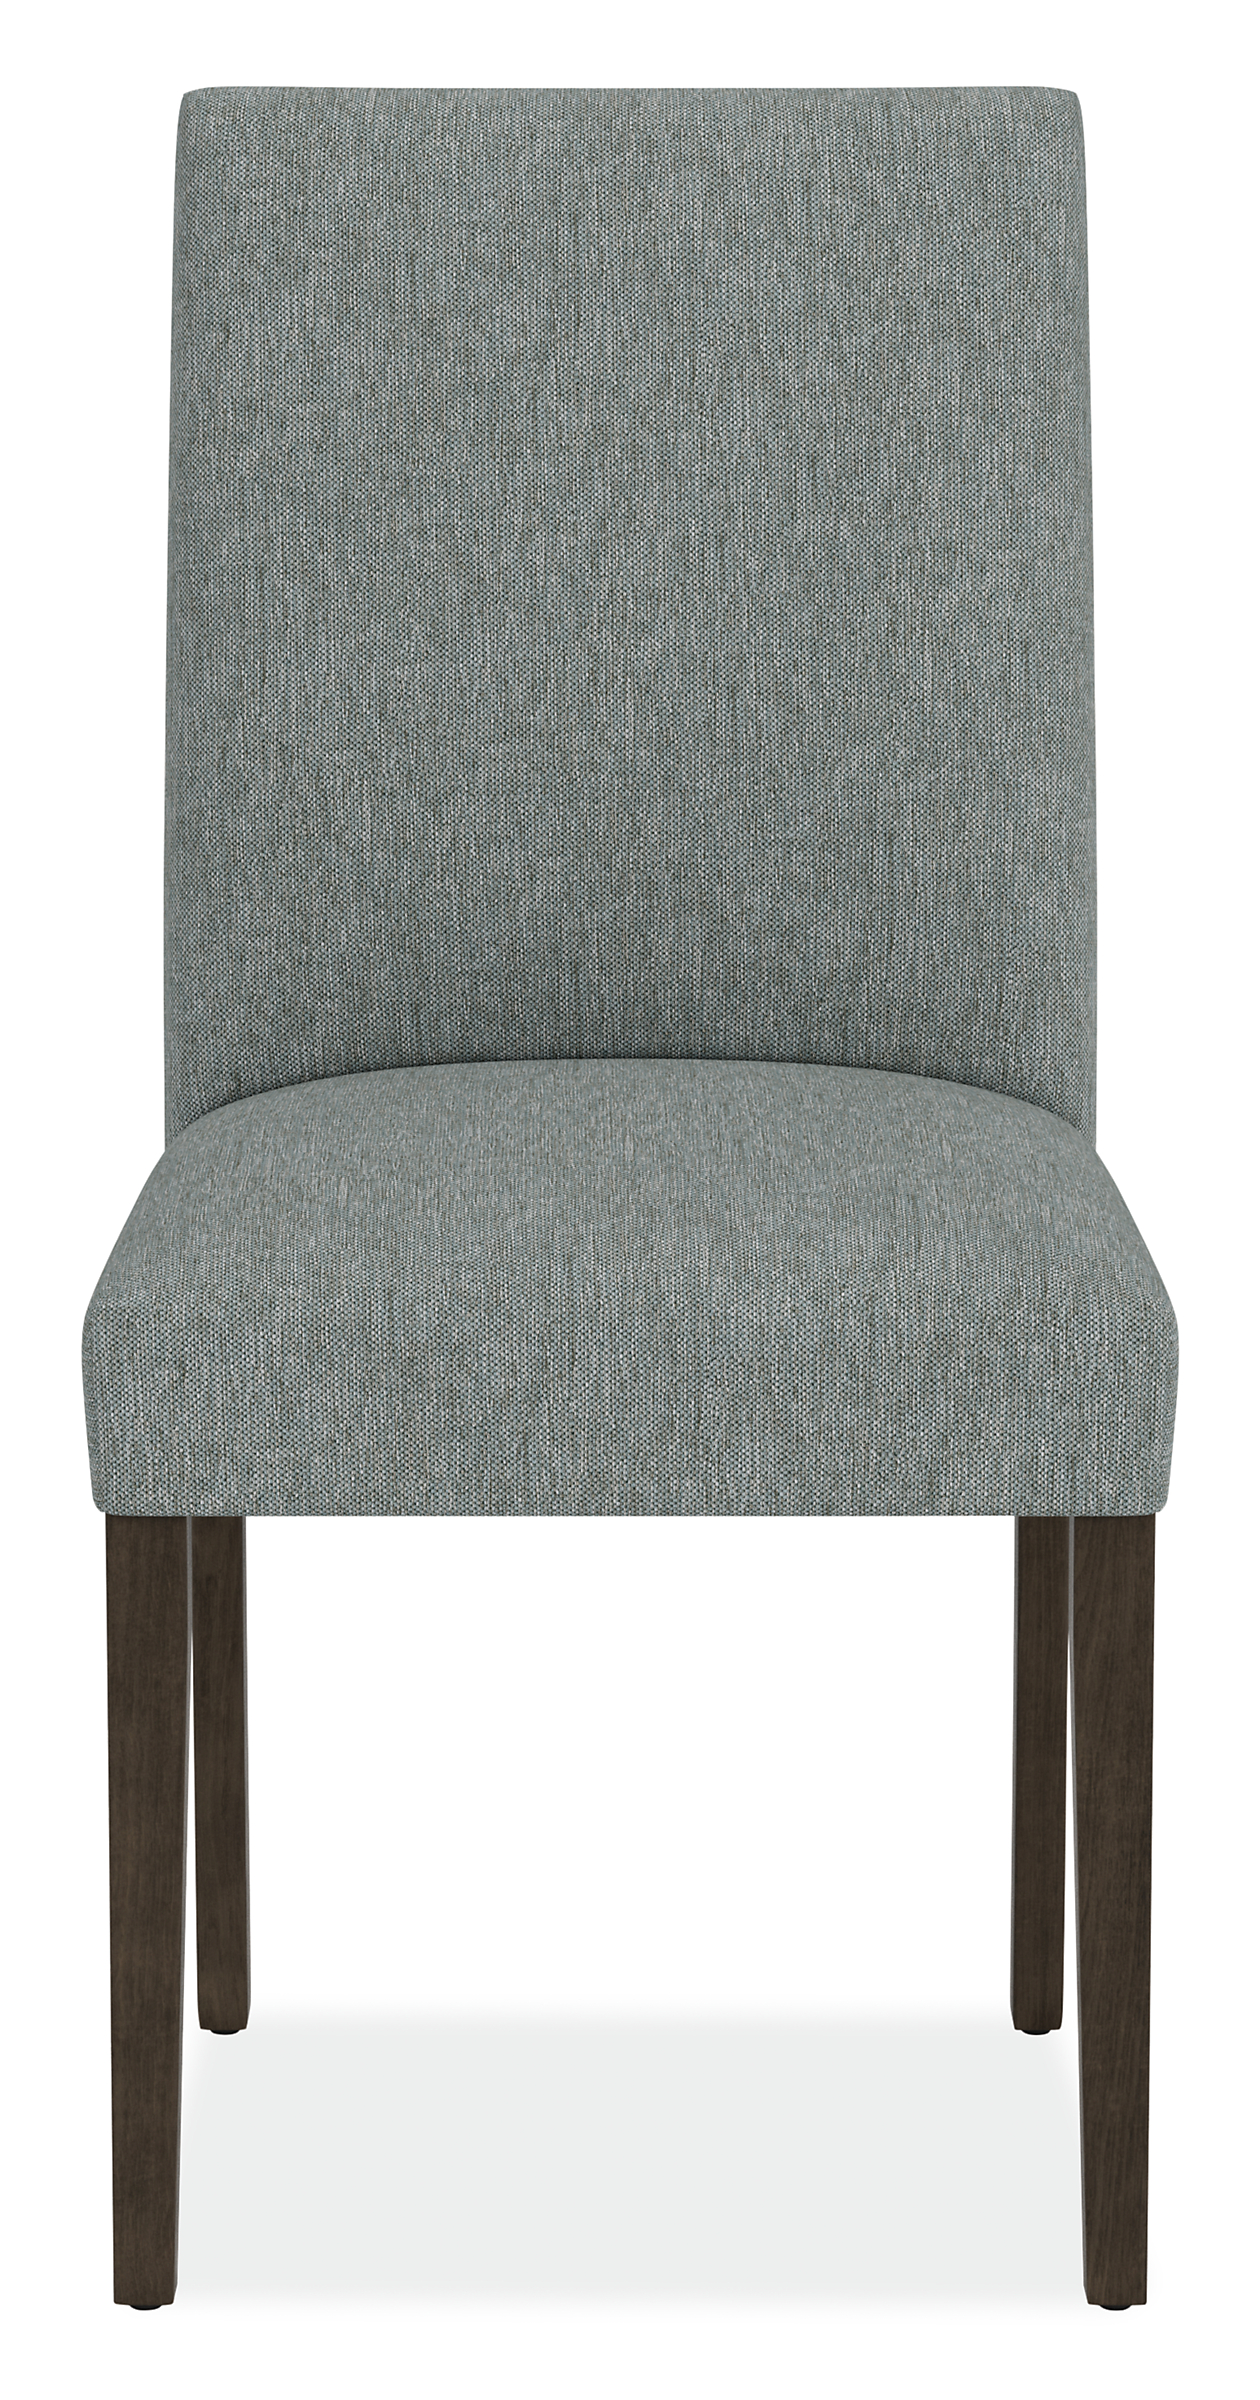 Front view of Peyton Side Chair in Sumner Steel with Charcoal Legs.